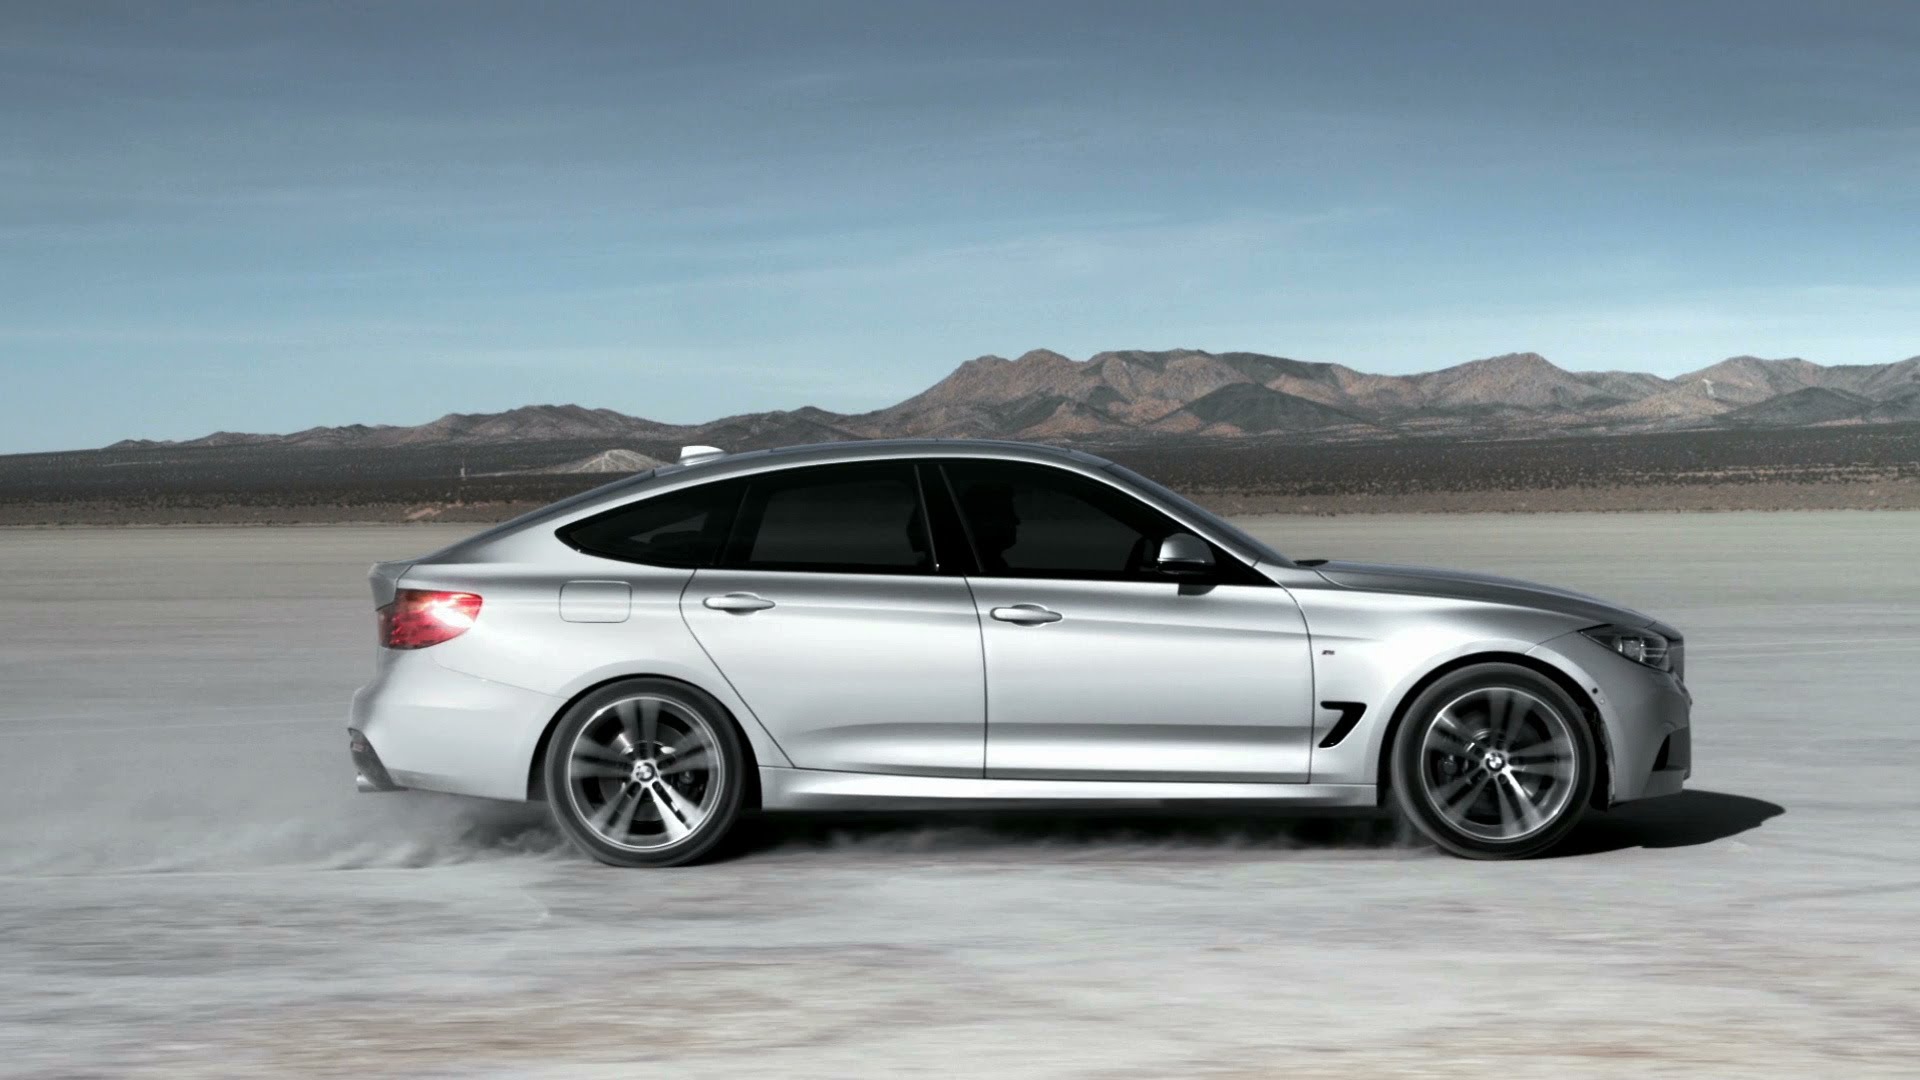 BMW 3 Series Gran Turismo Backgrounds, Compatible - PC, Mobile, Gadgets| 1920x1080 px